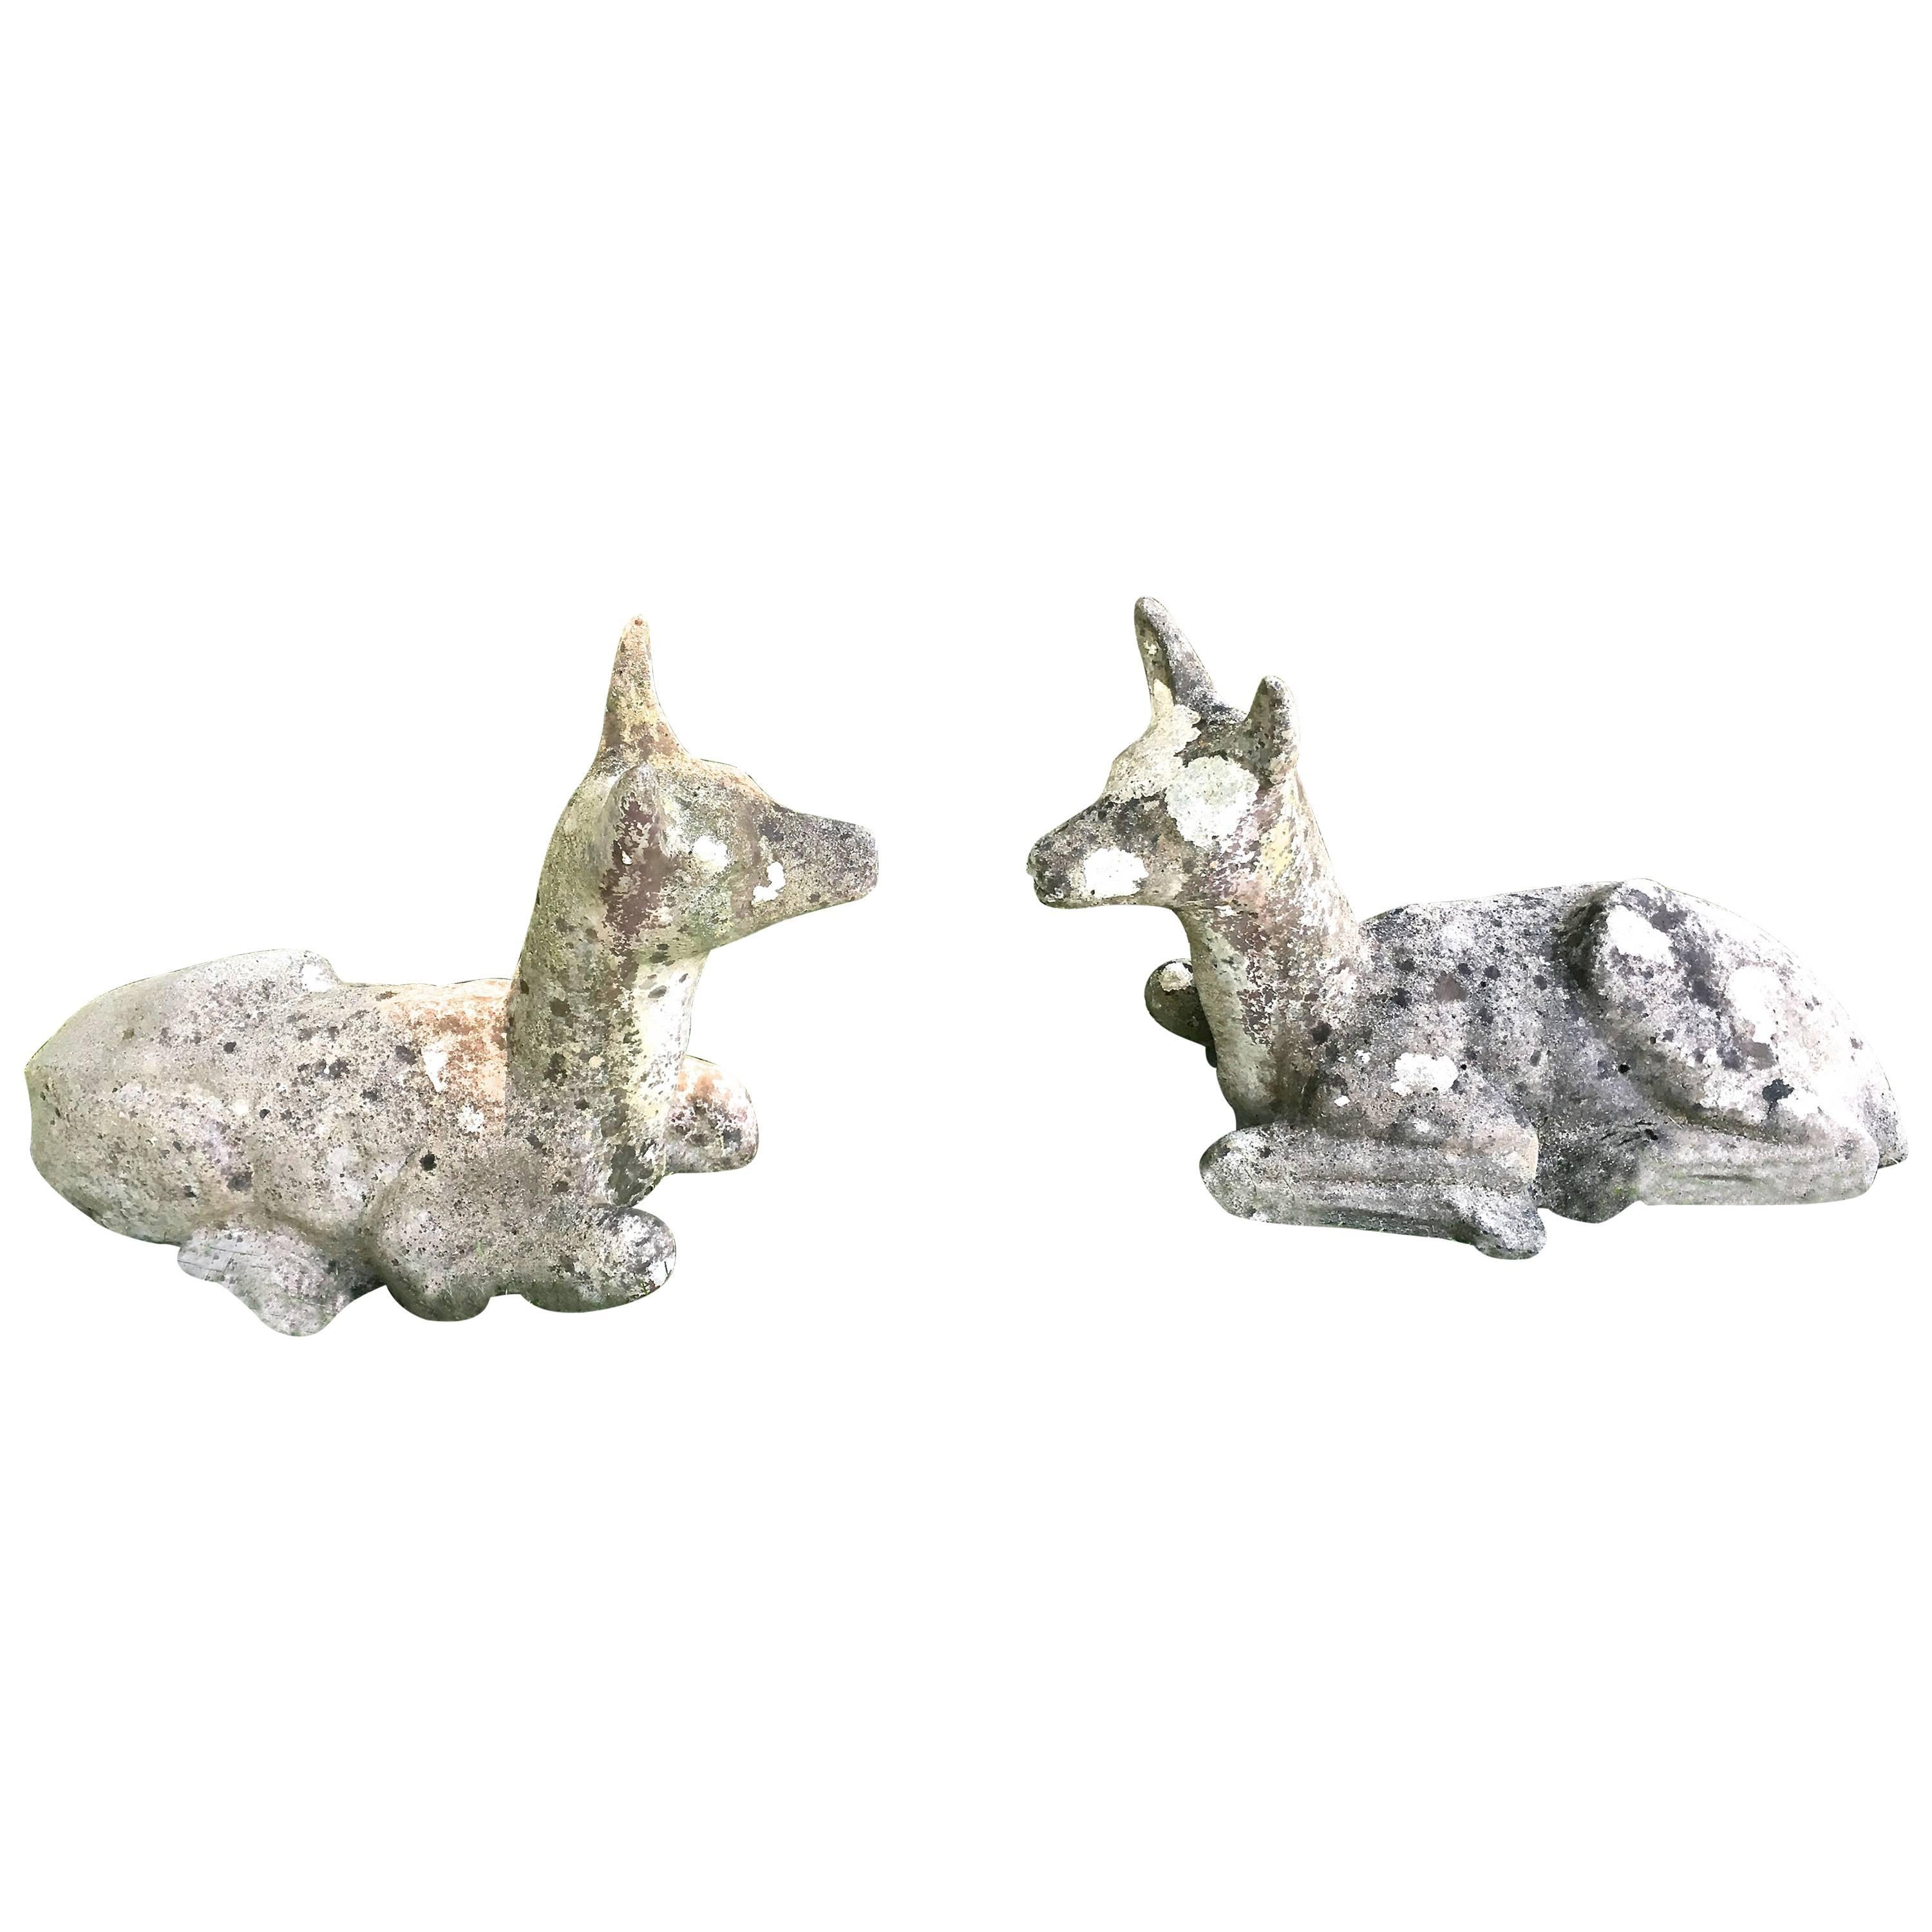 Two French Cast Stone Recumbent Deer